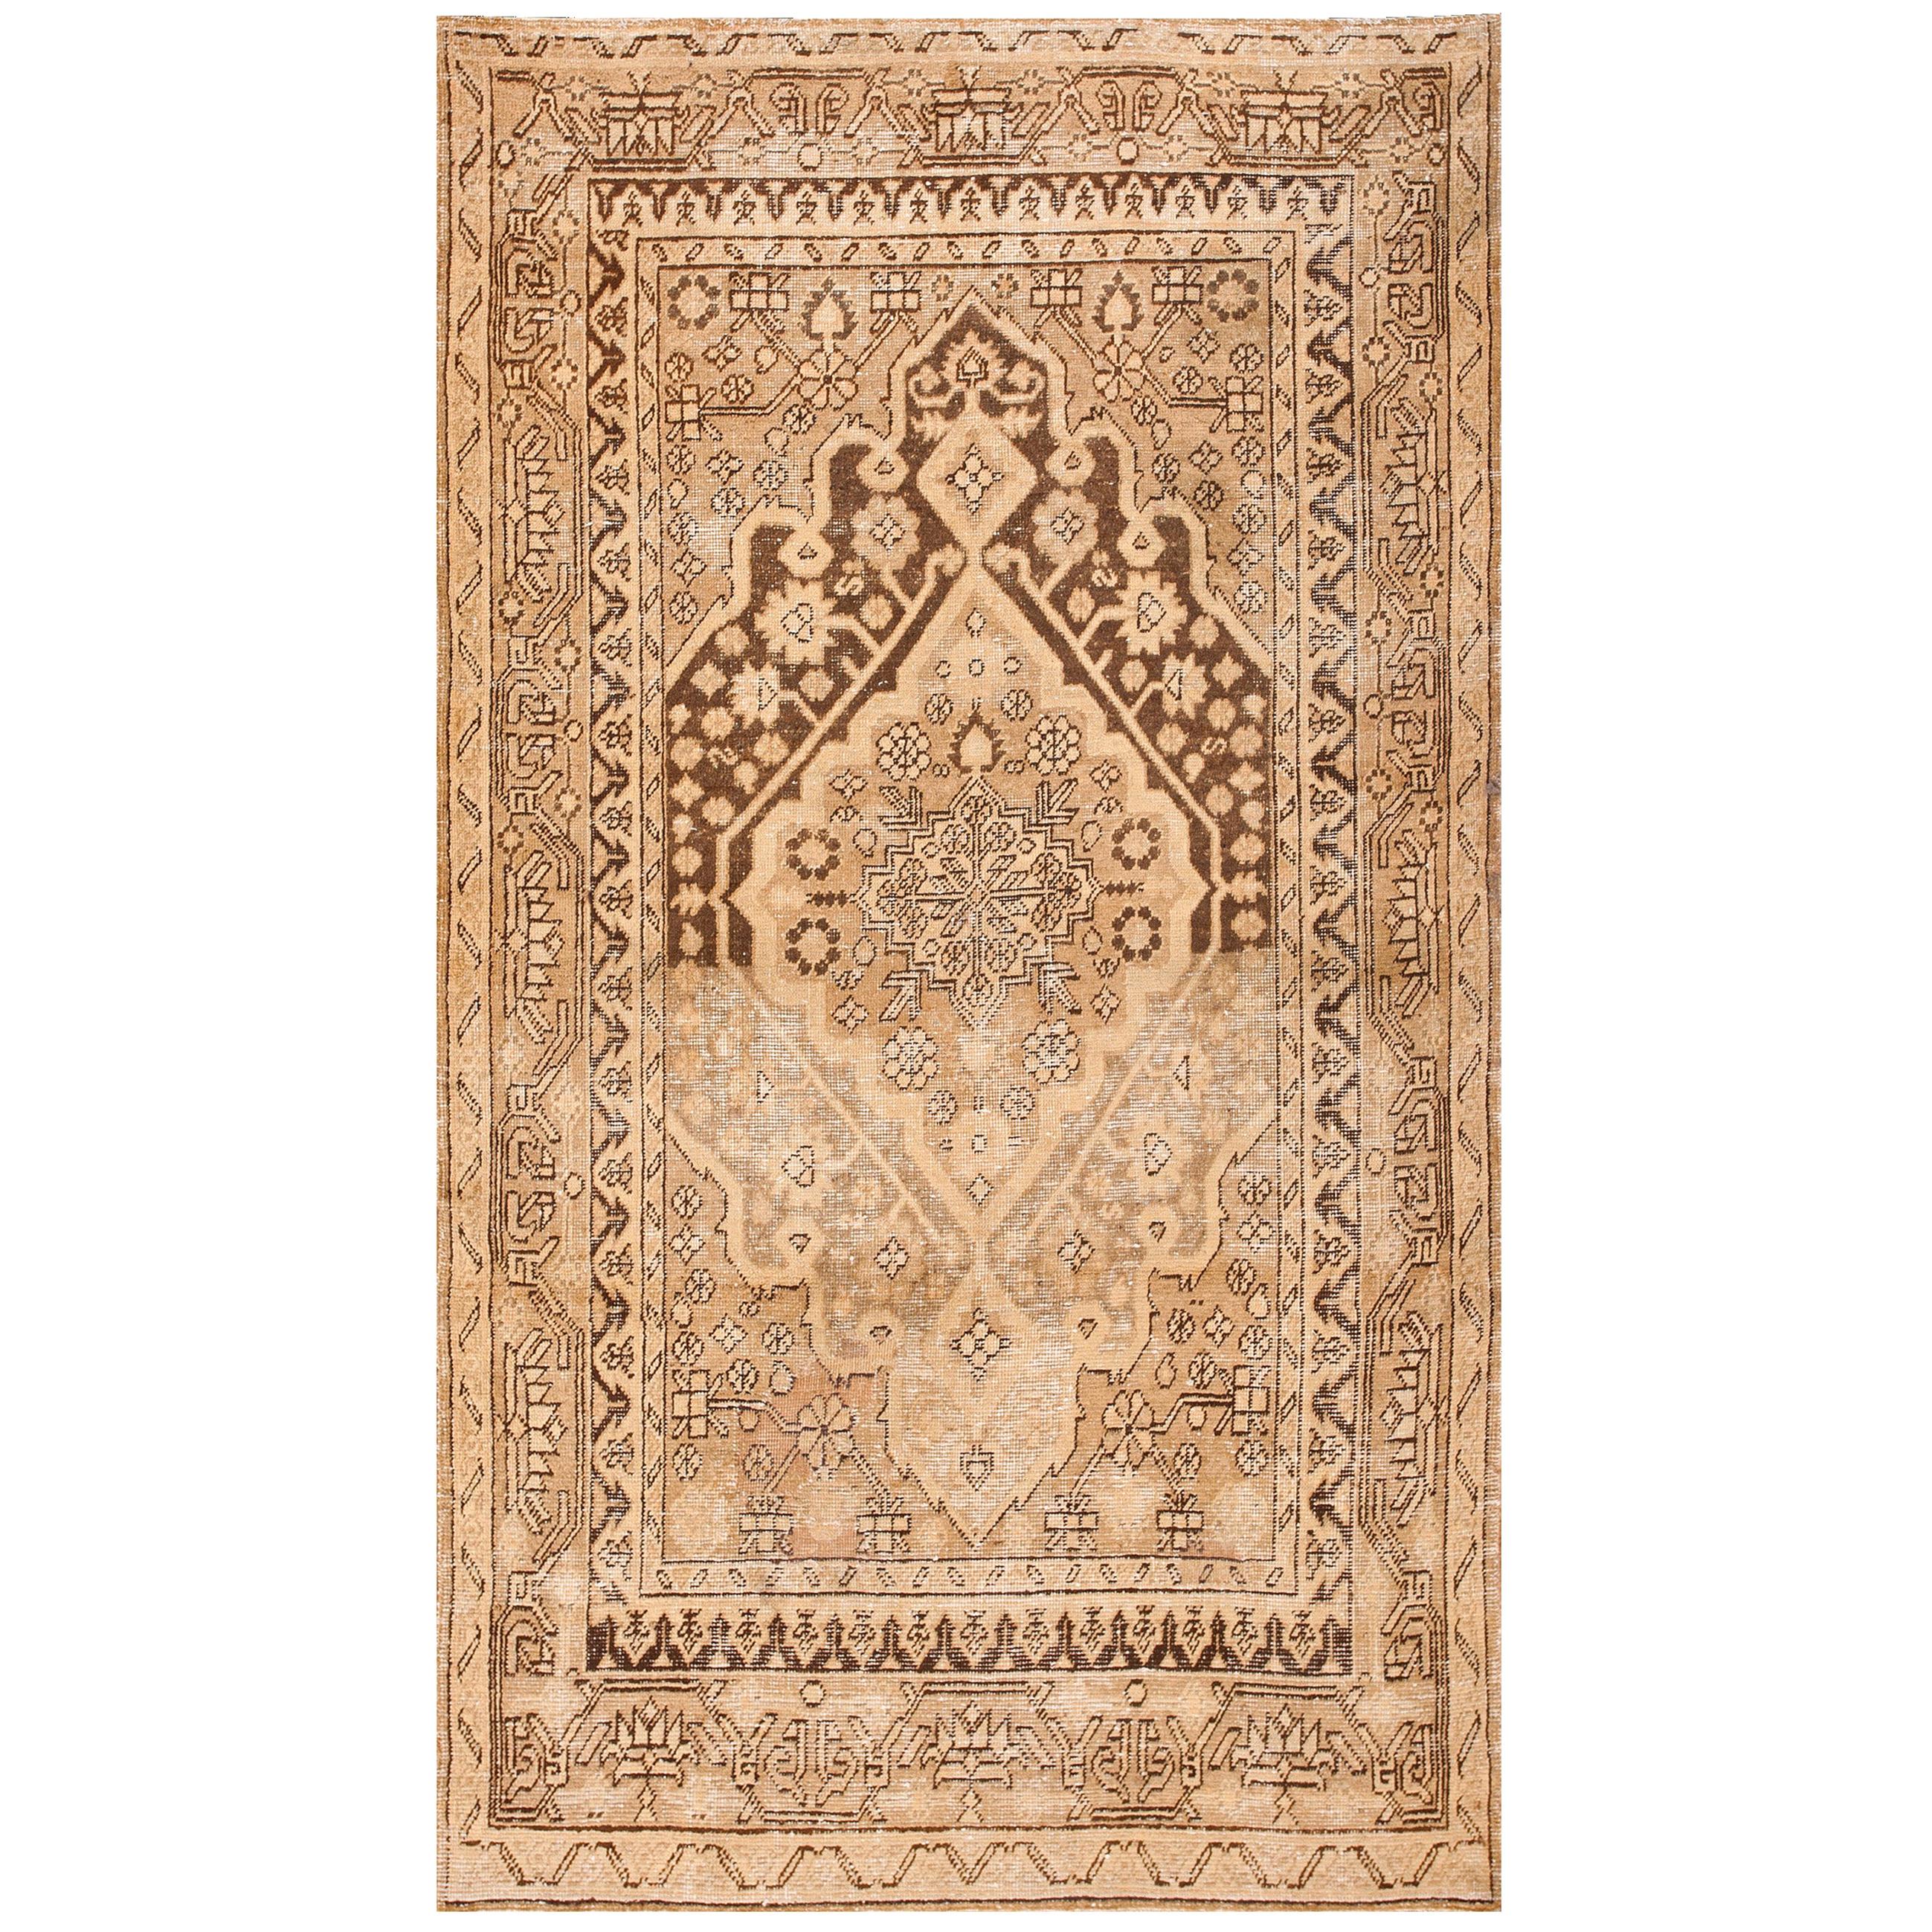 Early 20th Century Central Asian Khotan "Yarkand" Carpet (4'6" x 8'3"-137 x 251) For Sale